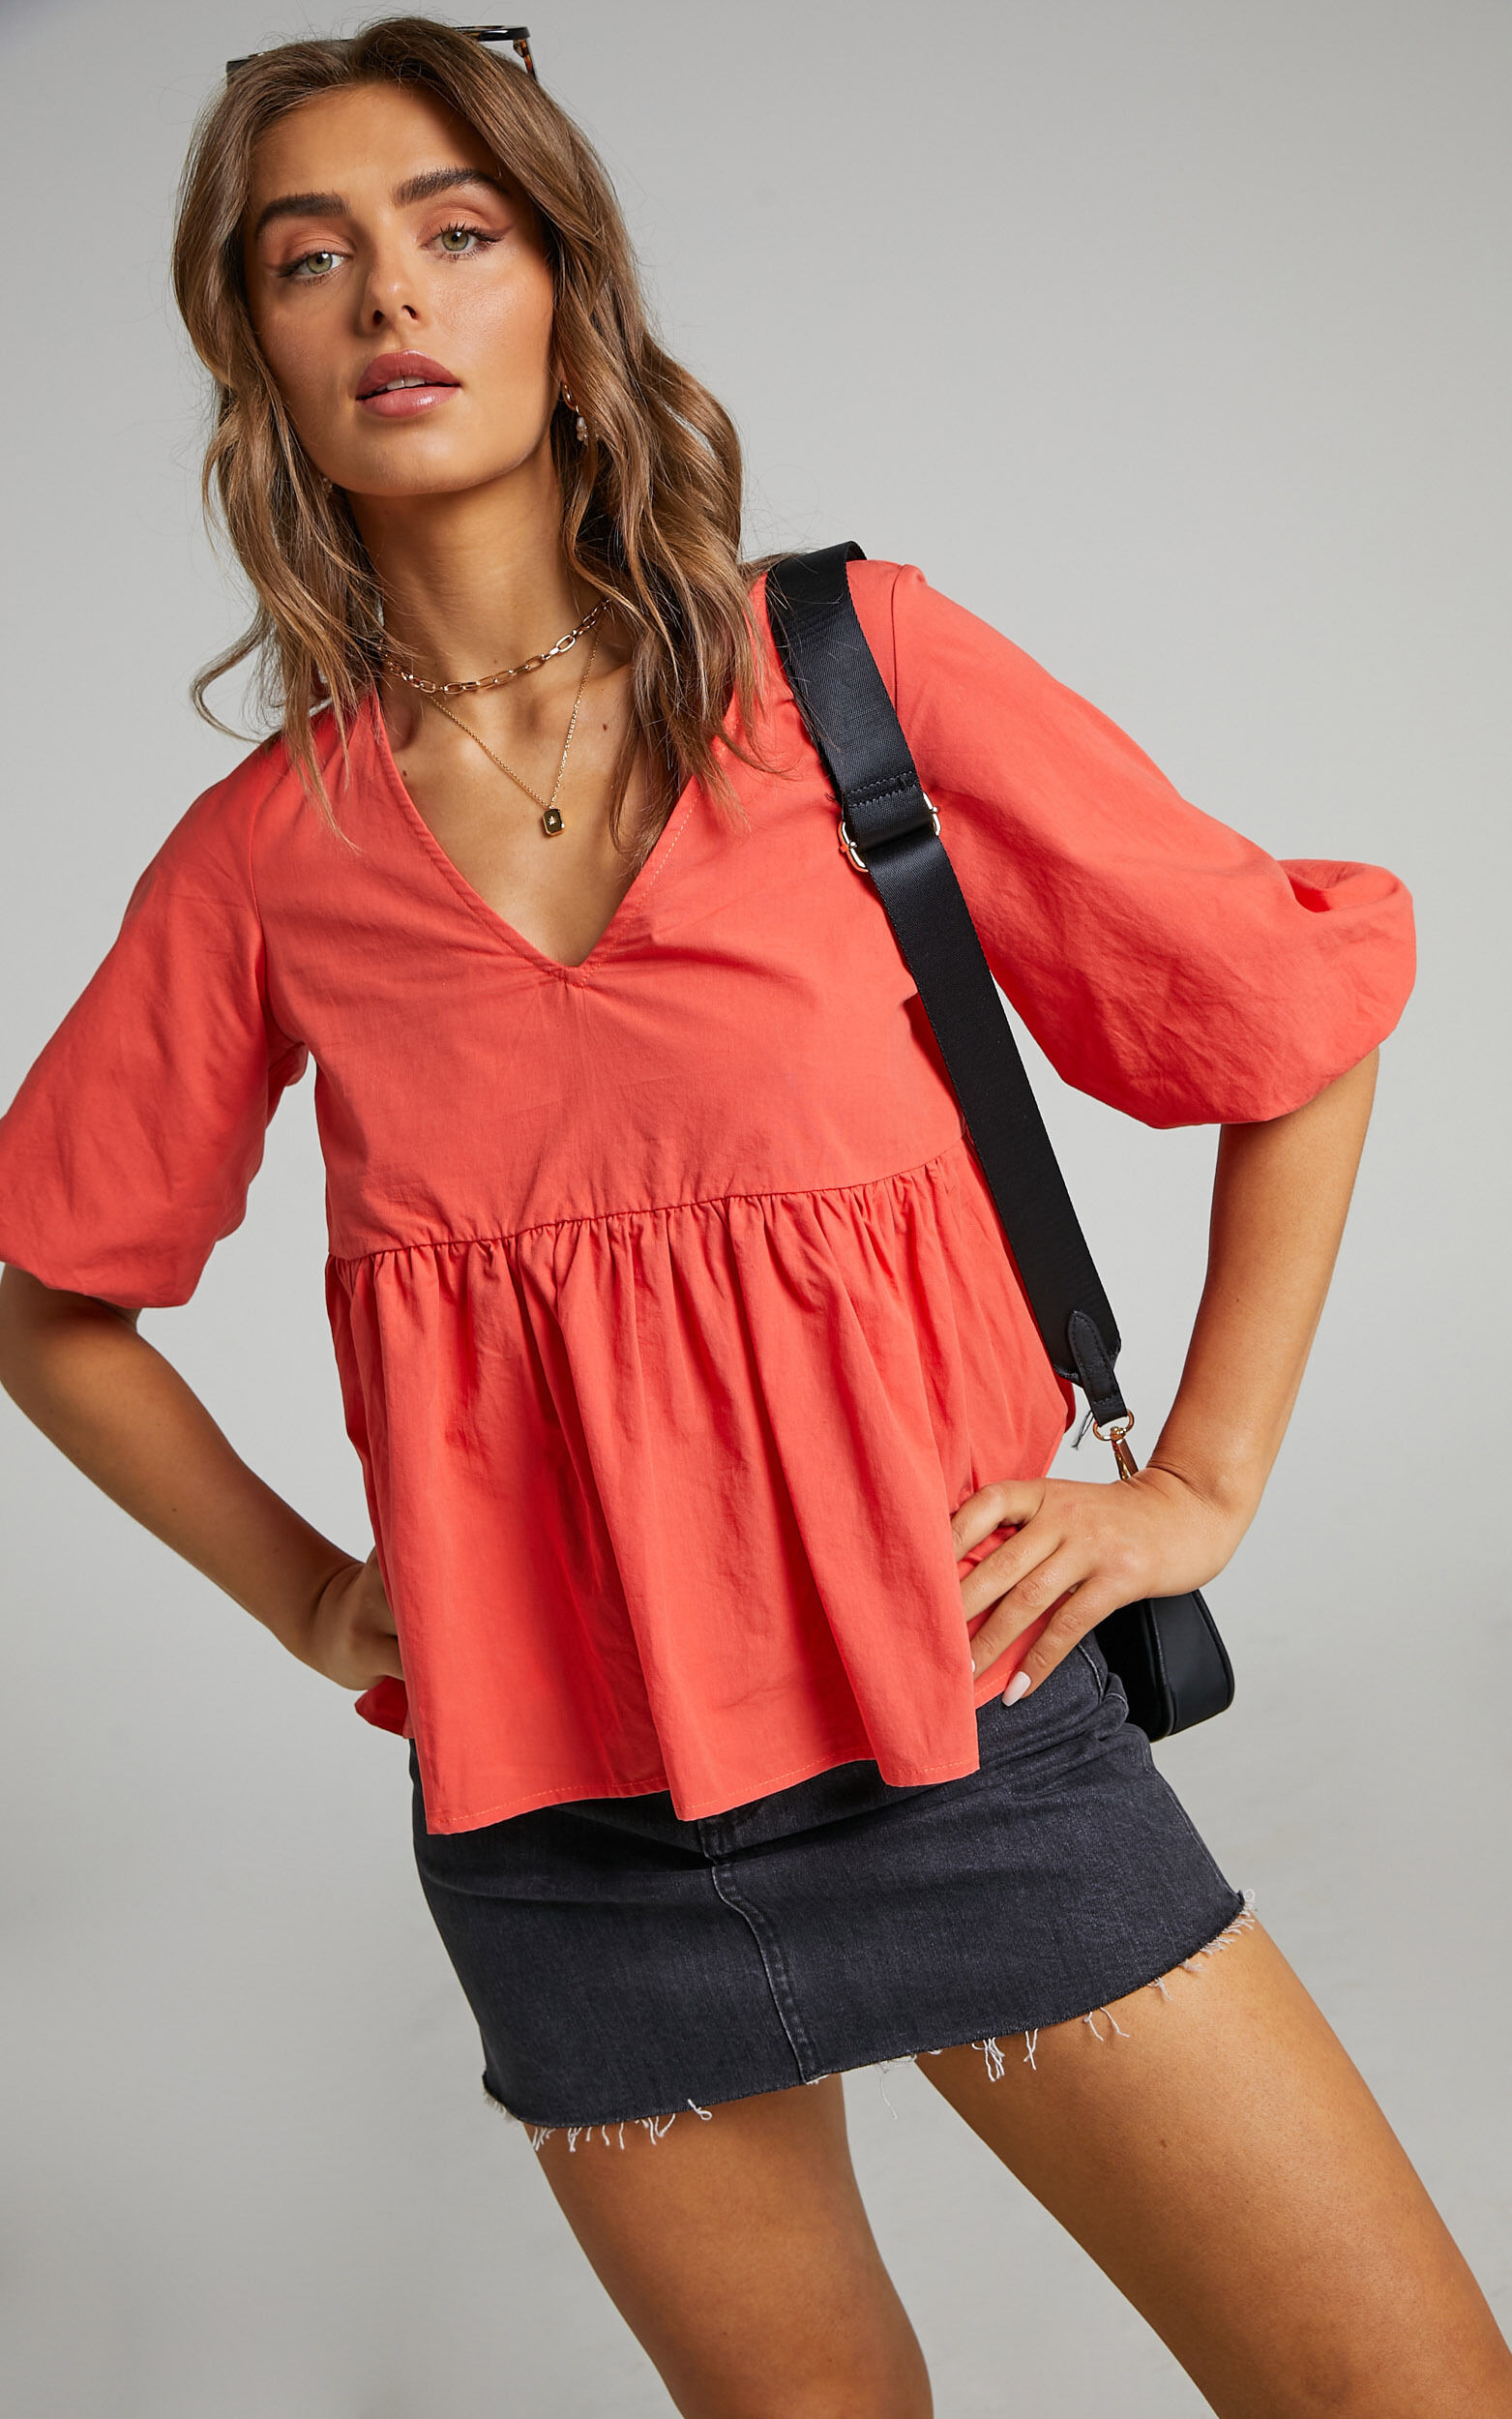 Lallen Smock Top with Peplum Hem in Oxy Fire - 06, RED2, super-hi-res image number null